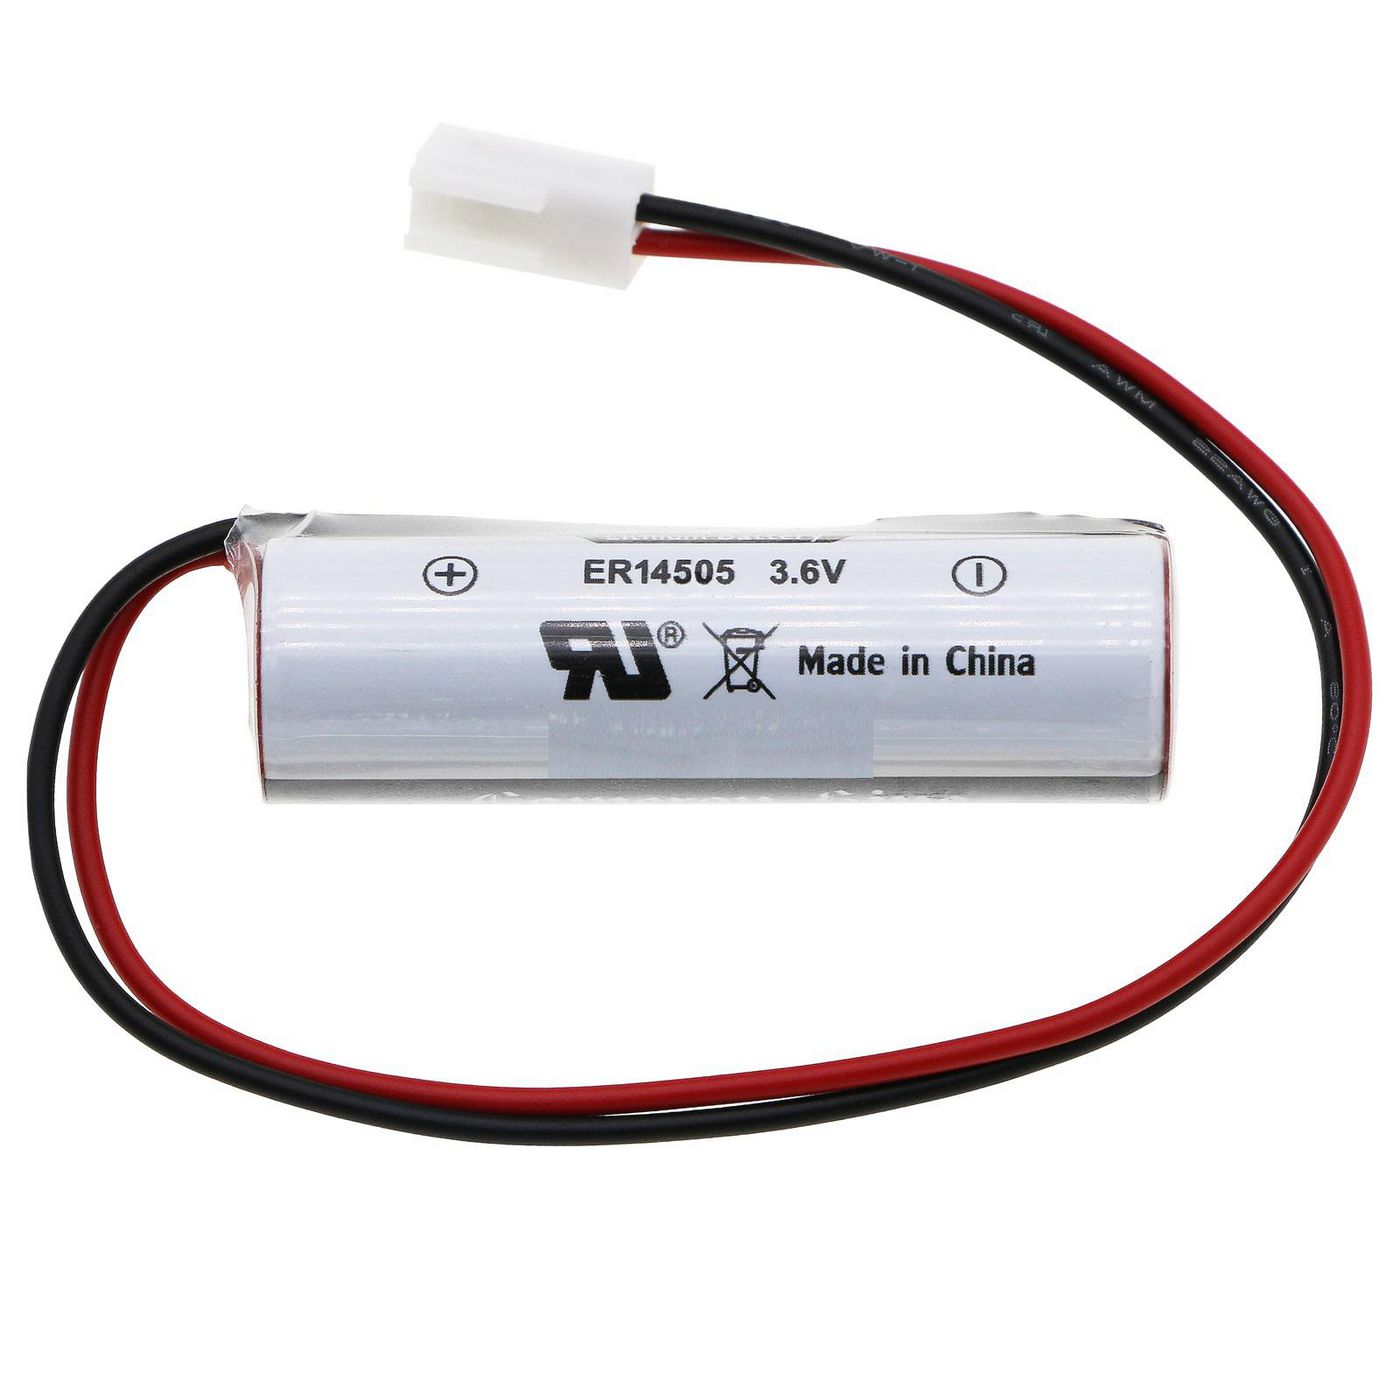 CoreParts MBXMED-BA664 W128426857 Battery for Siemens Medical 